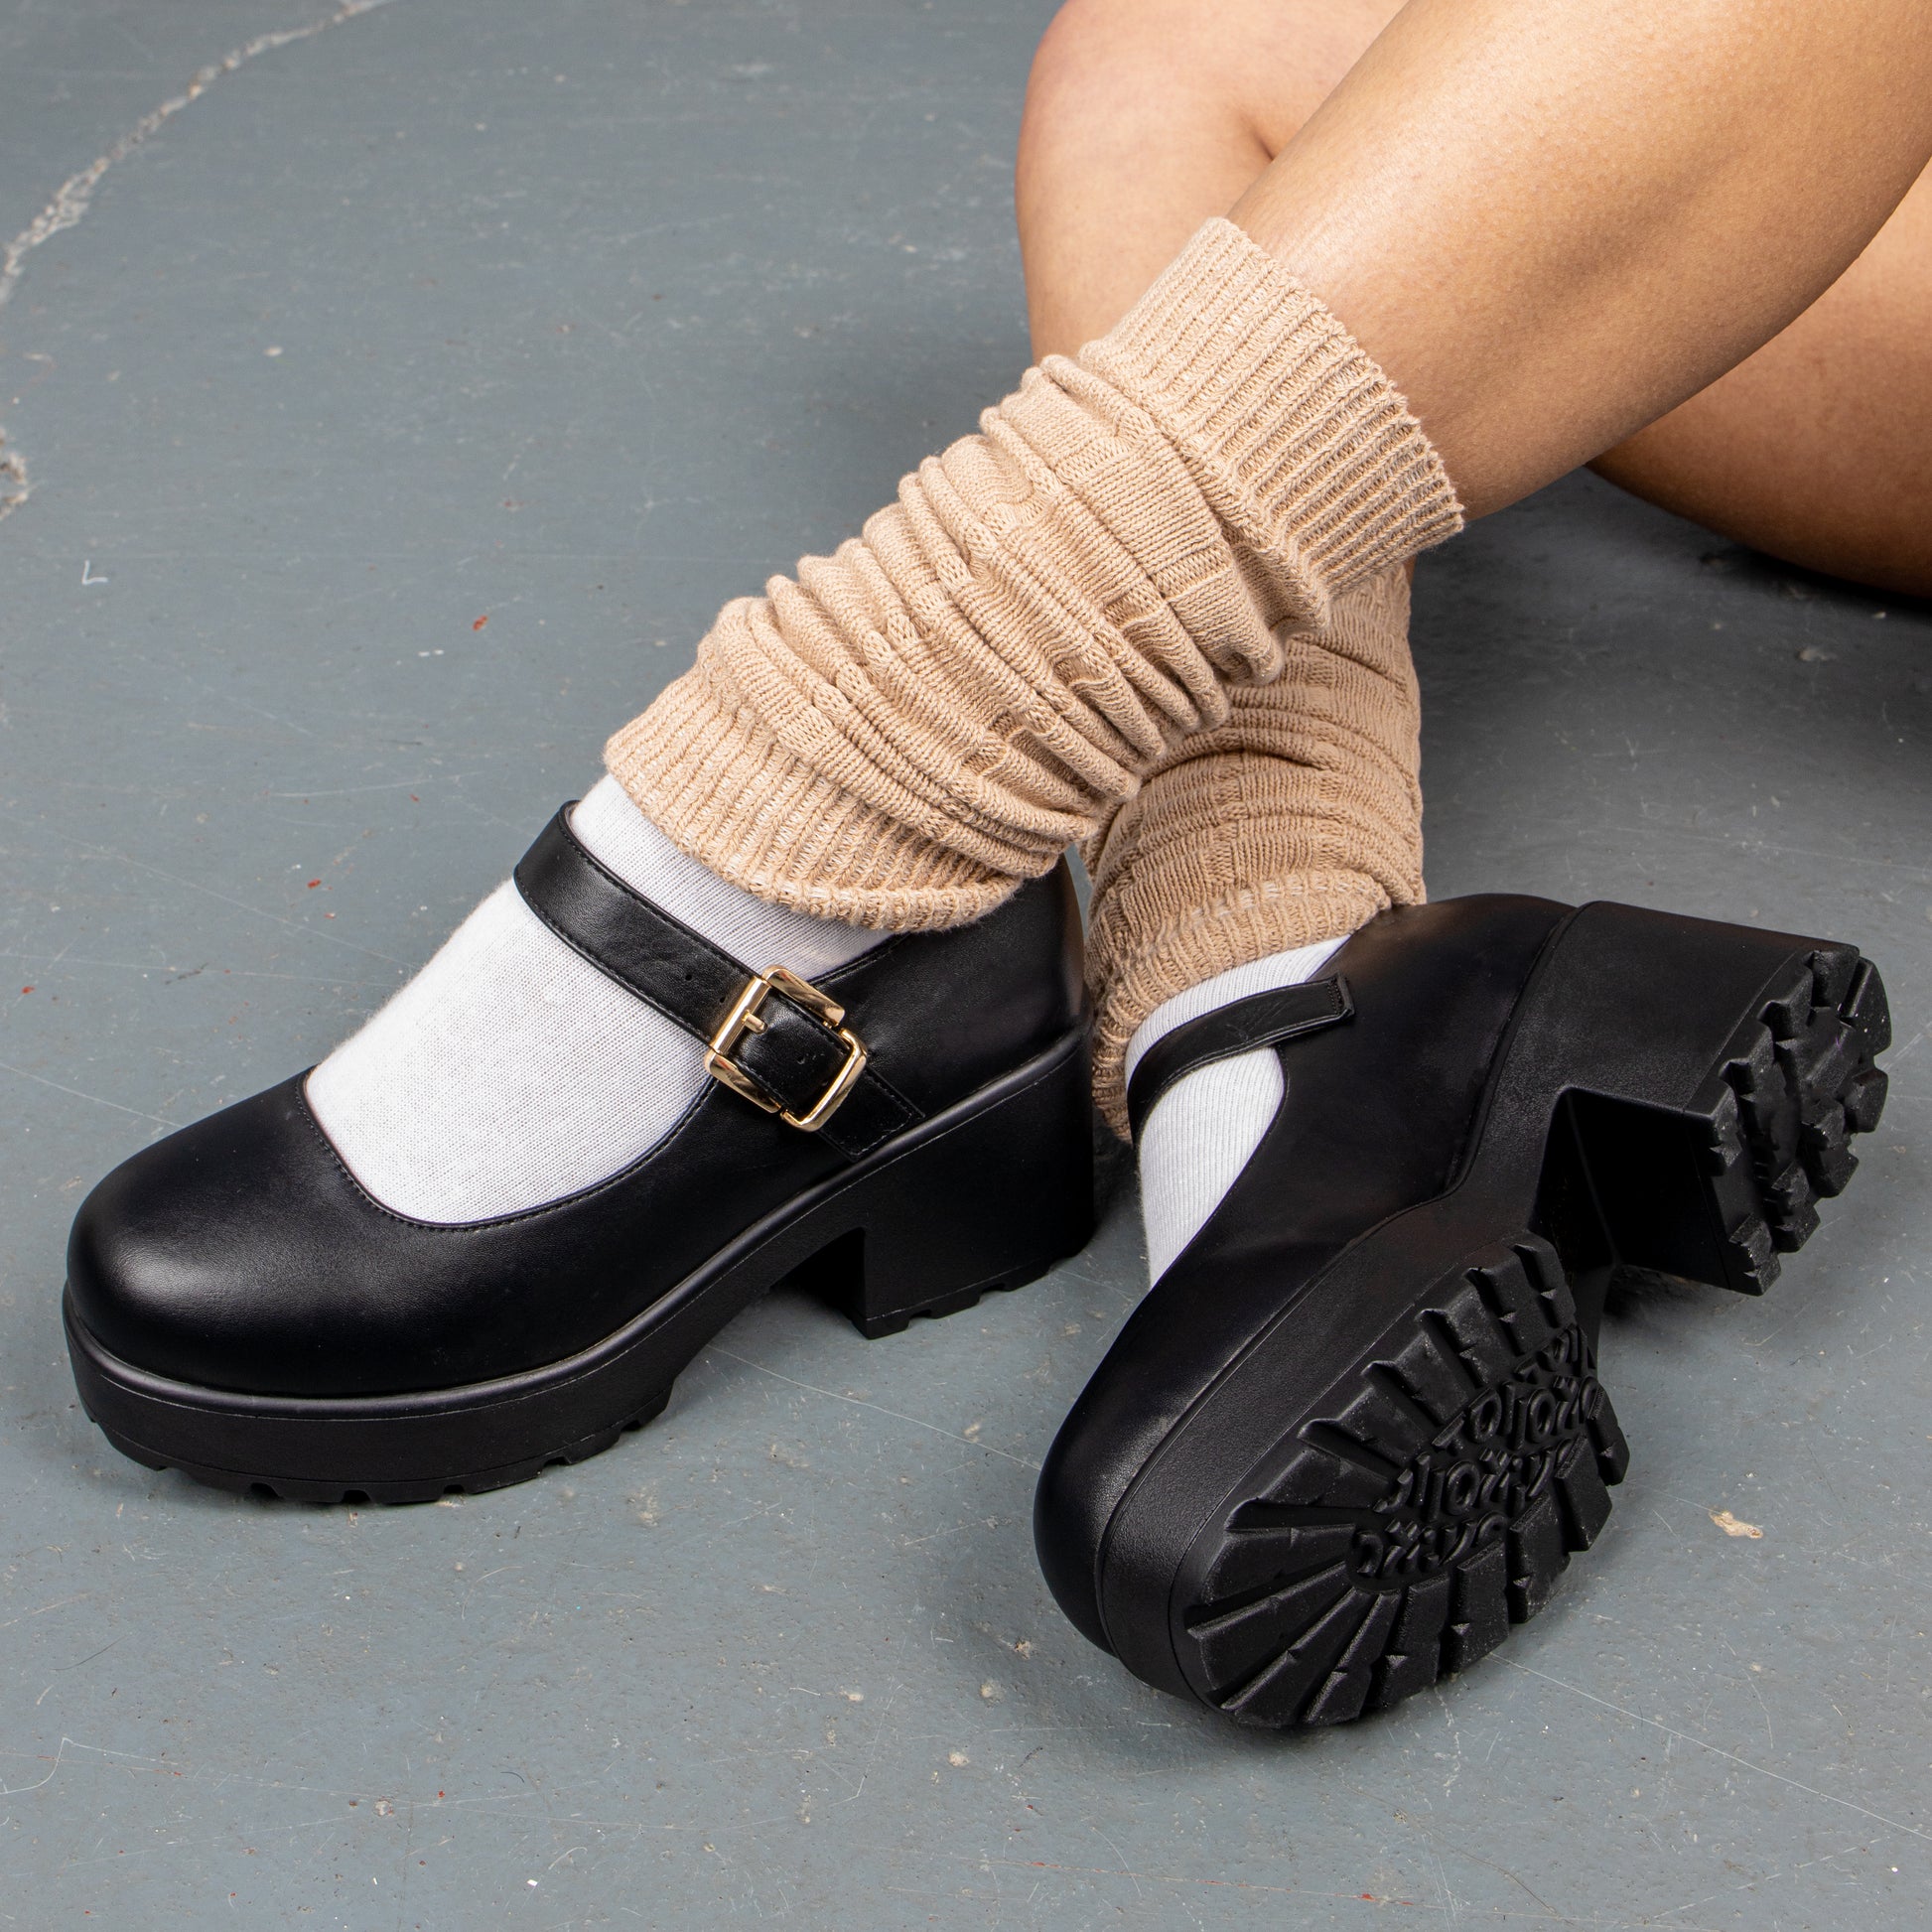 Tira Mary Jane Shoes 'Faux Leather Edition' - Mary Janes - KOI Footwear - Black - Model Top View